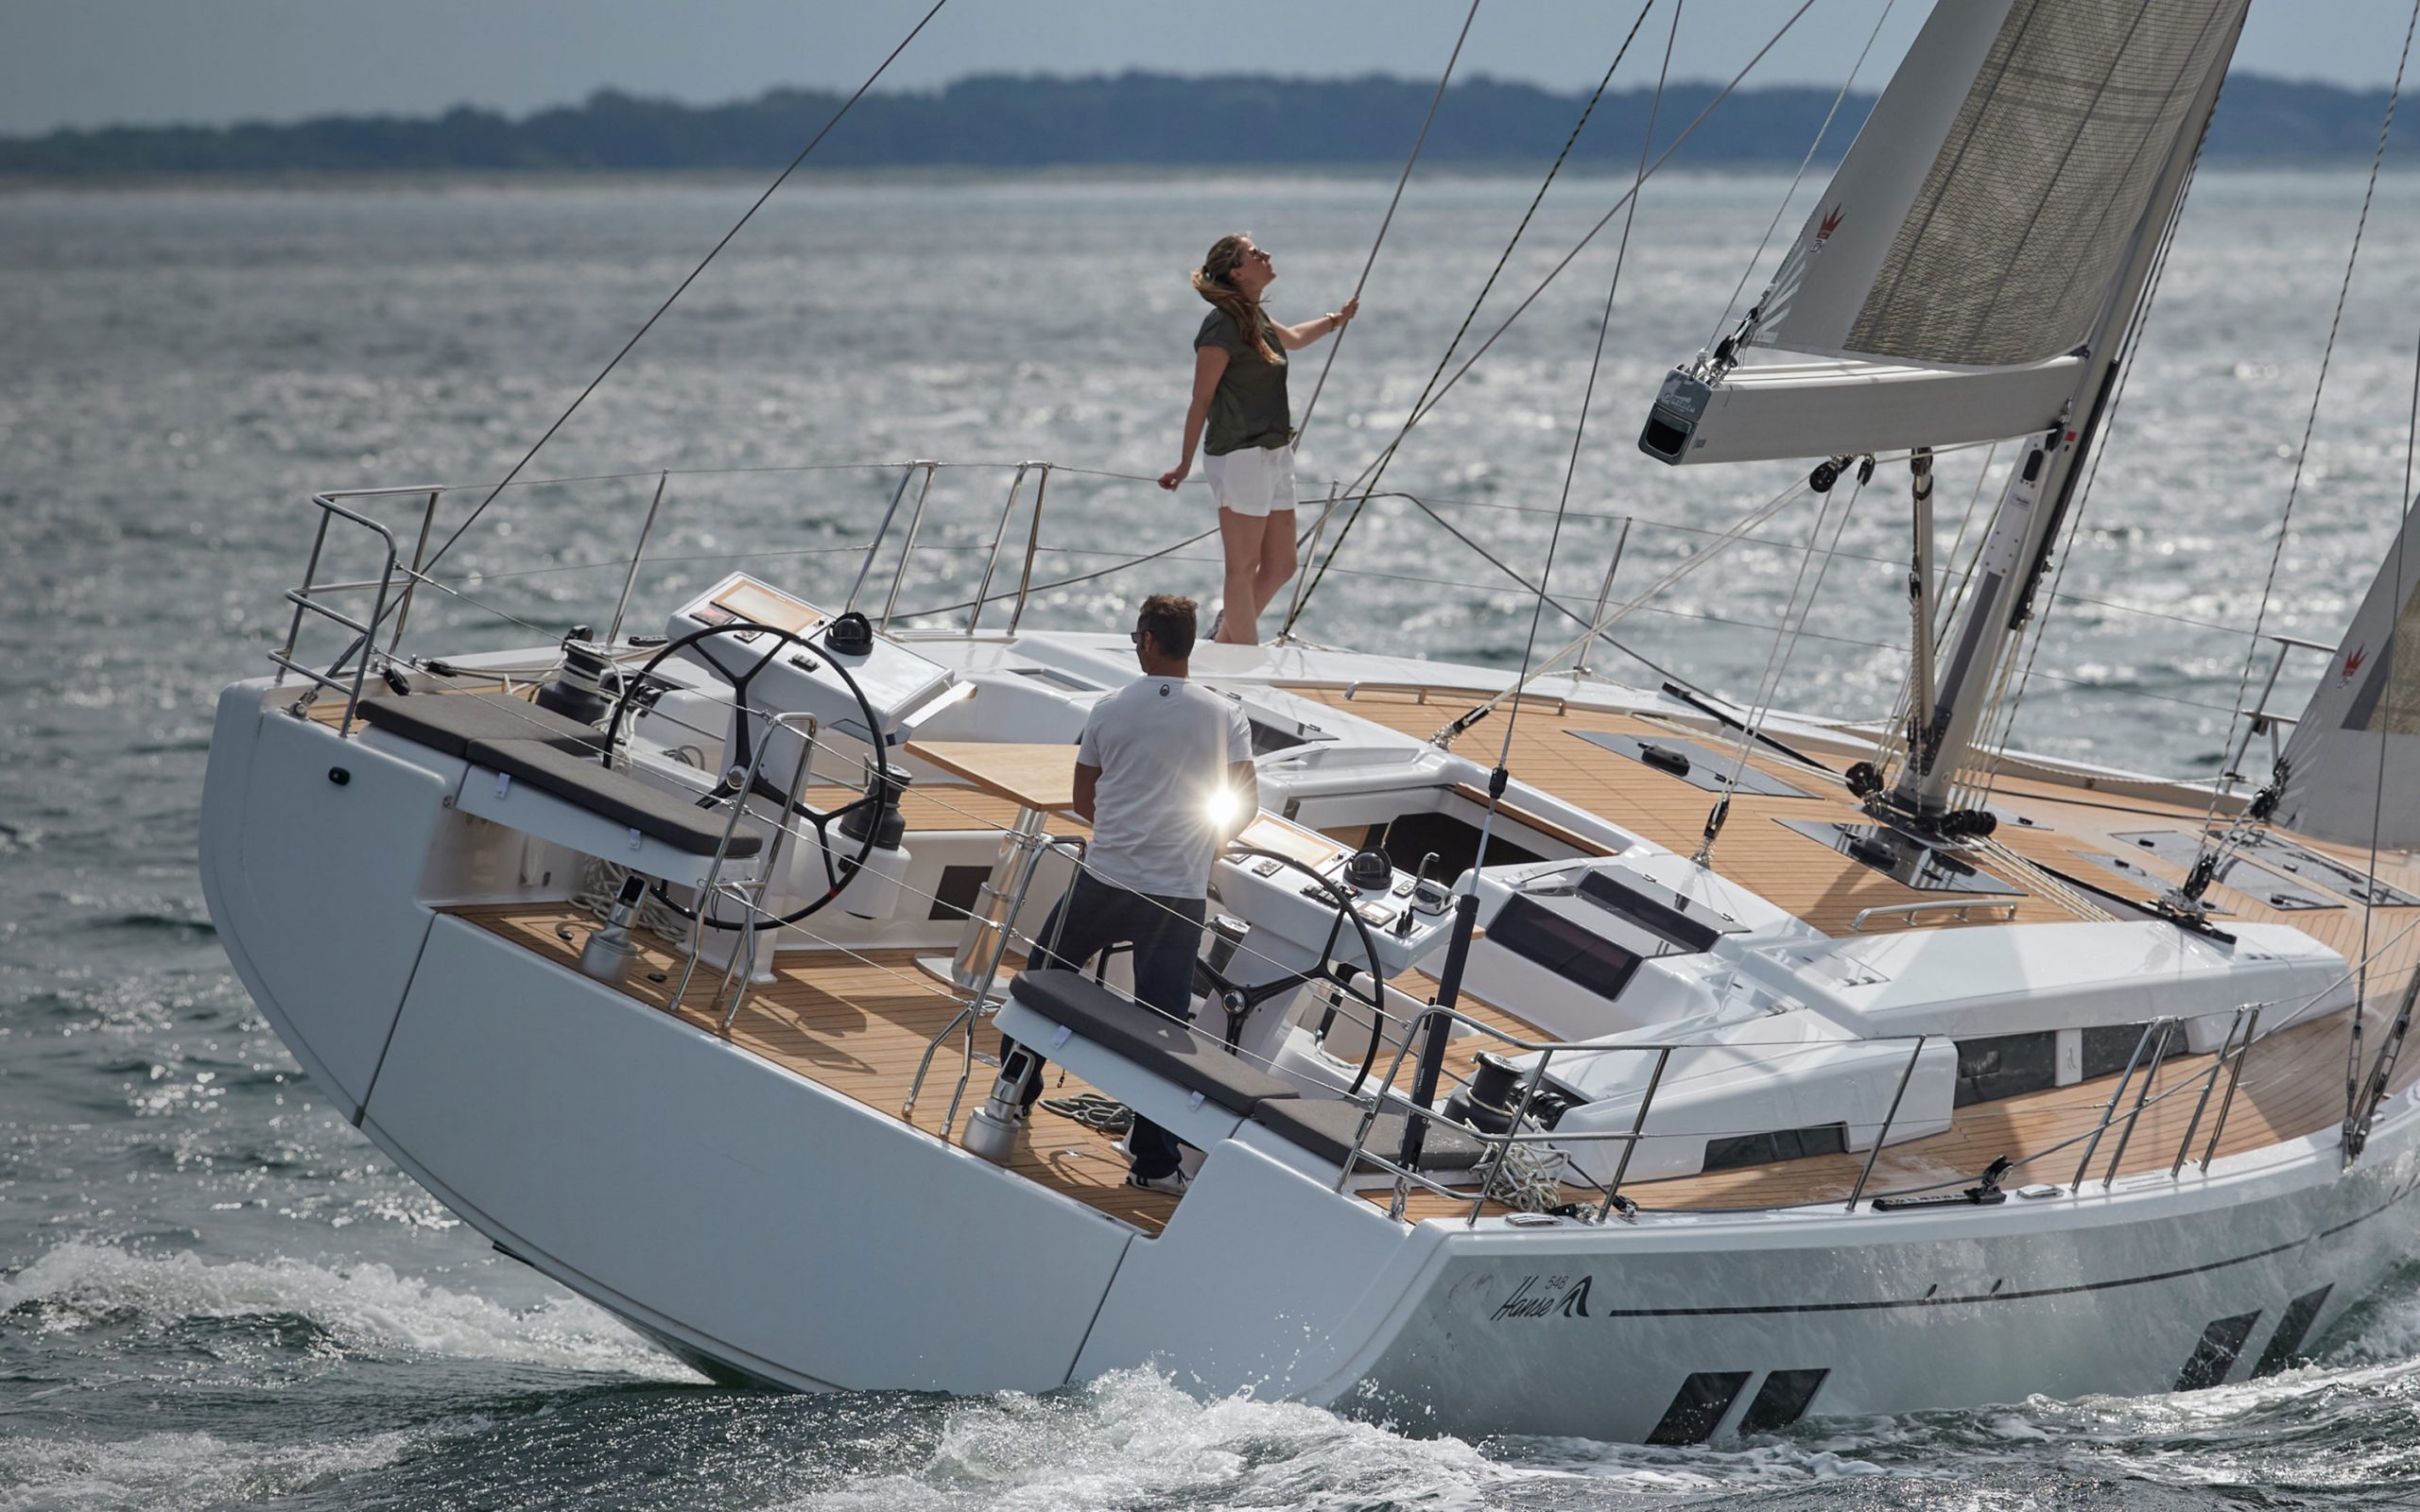 Hanse fitted with Flexiteek 2G